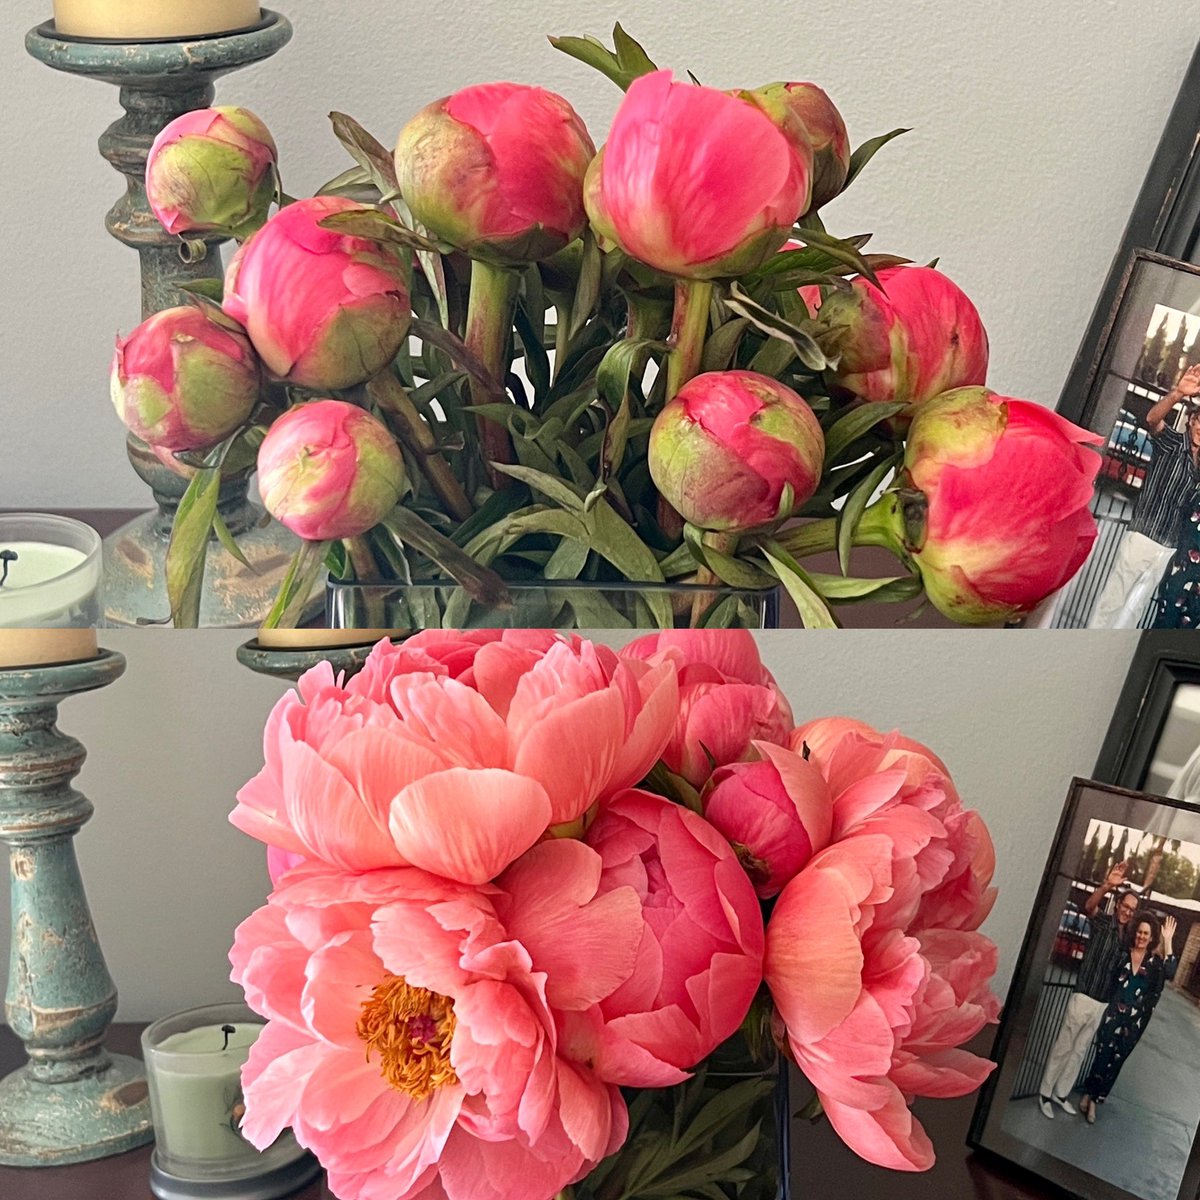 Can’t say enough about this woman owned floral company Farmgirlflowers.com These are my peonies 🩷🧡 They do the most beautiful floral arrangements and ship nationwide. No vases. Wrapped in burlap for delivery. #flowers #florist #gift #MothersDay